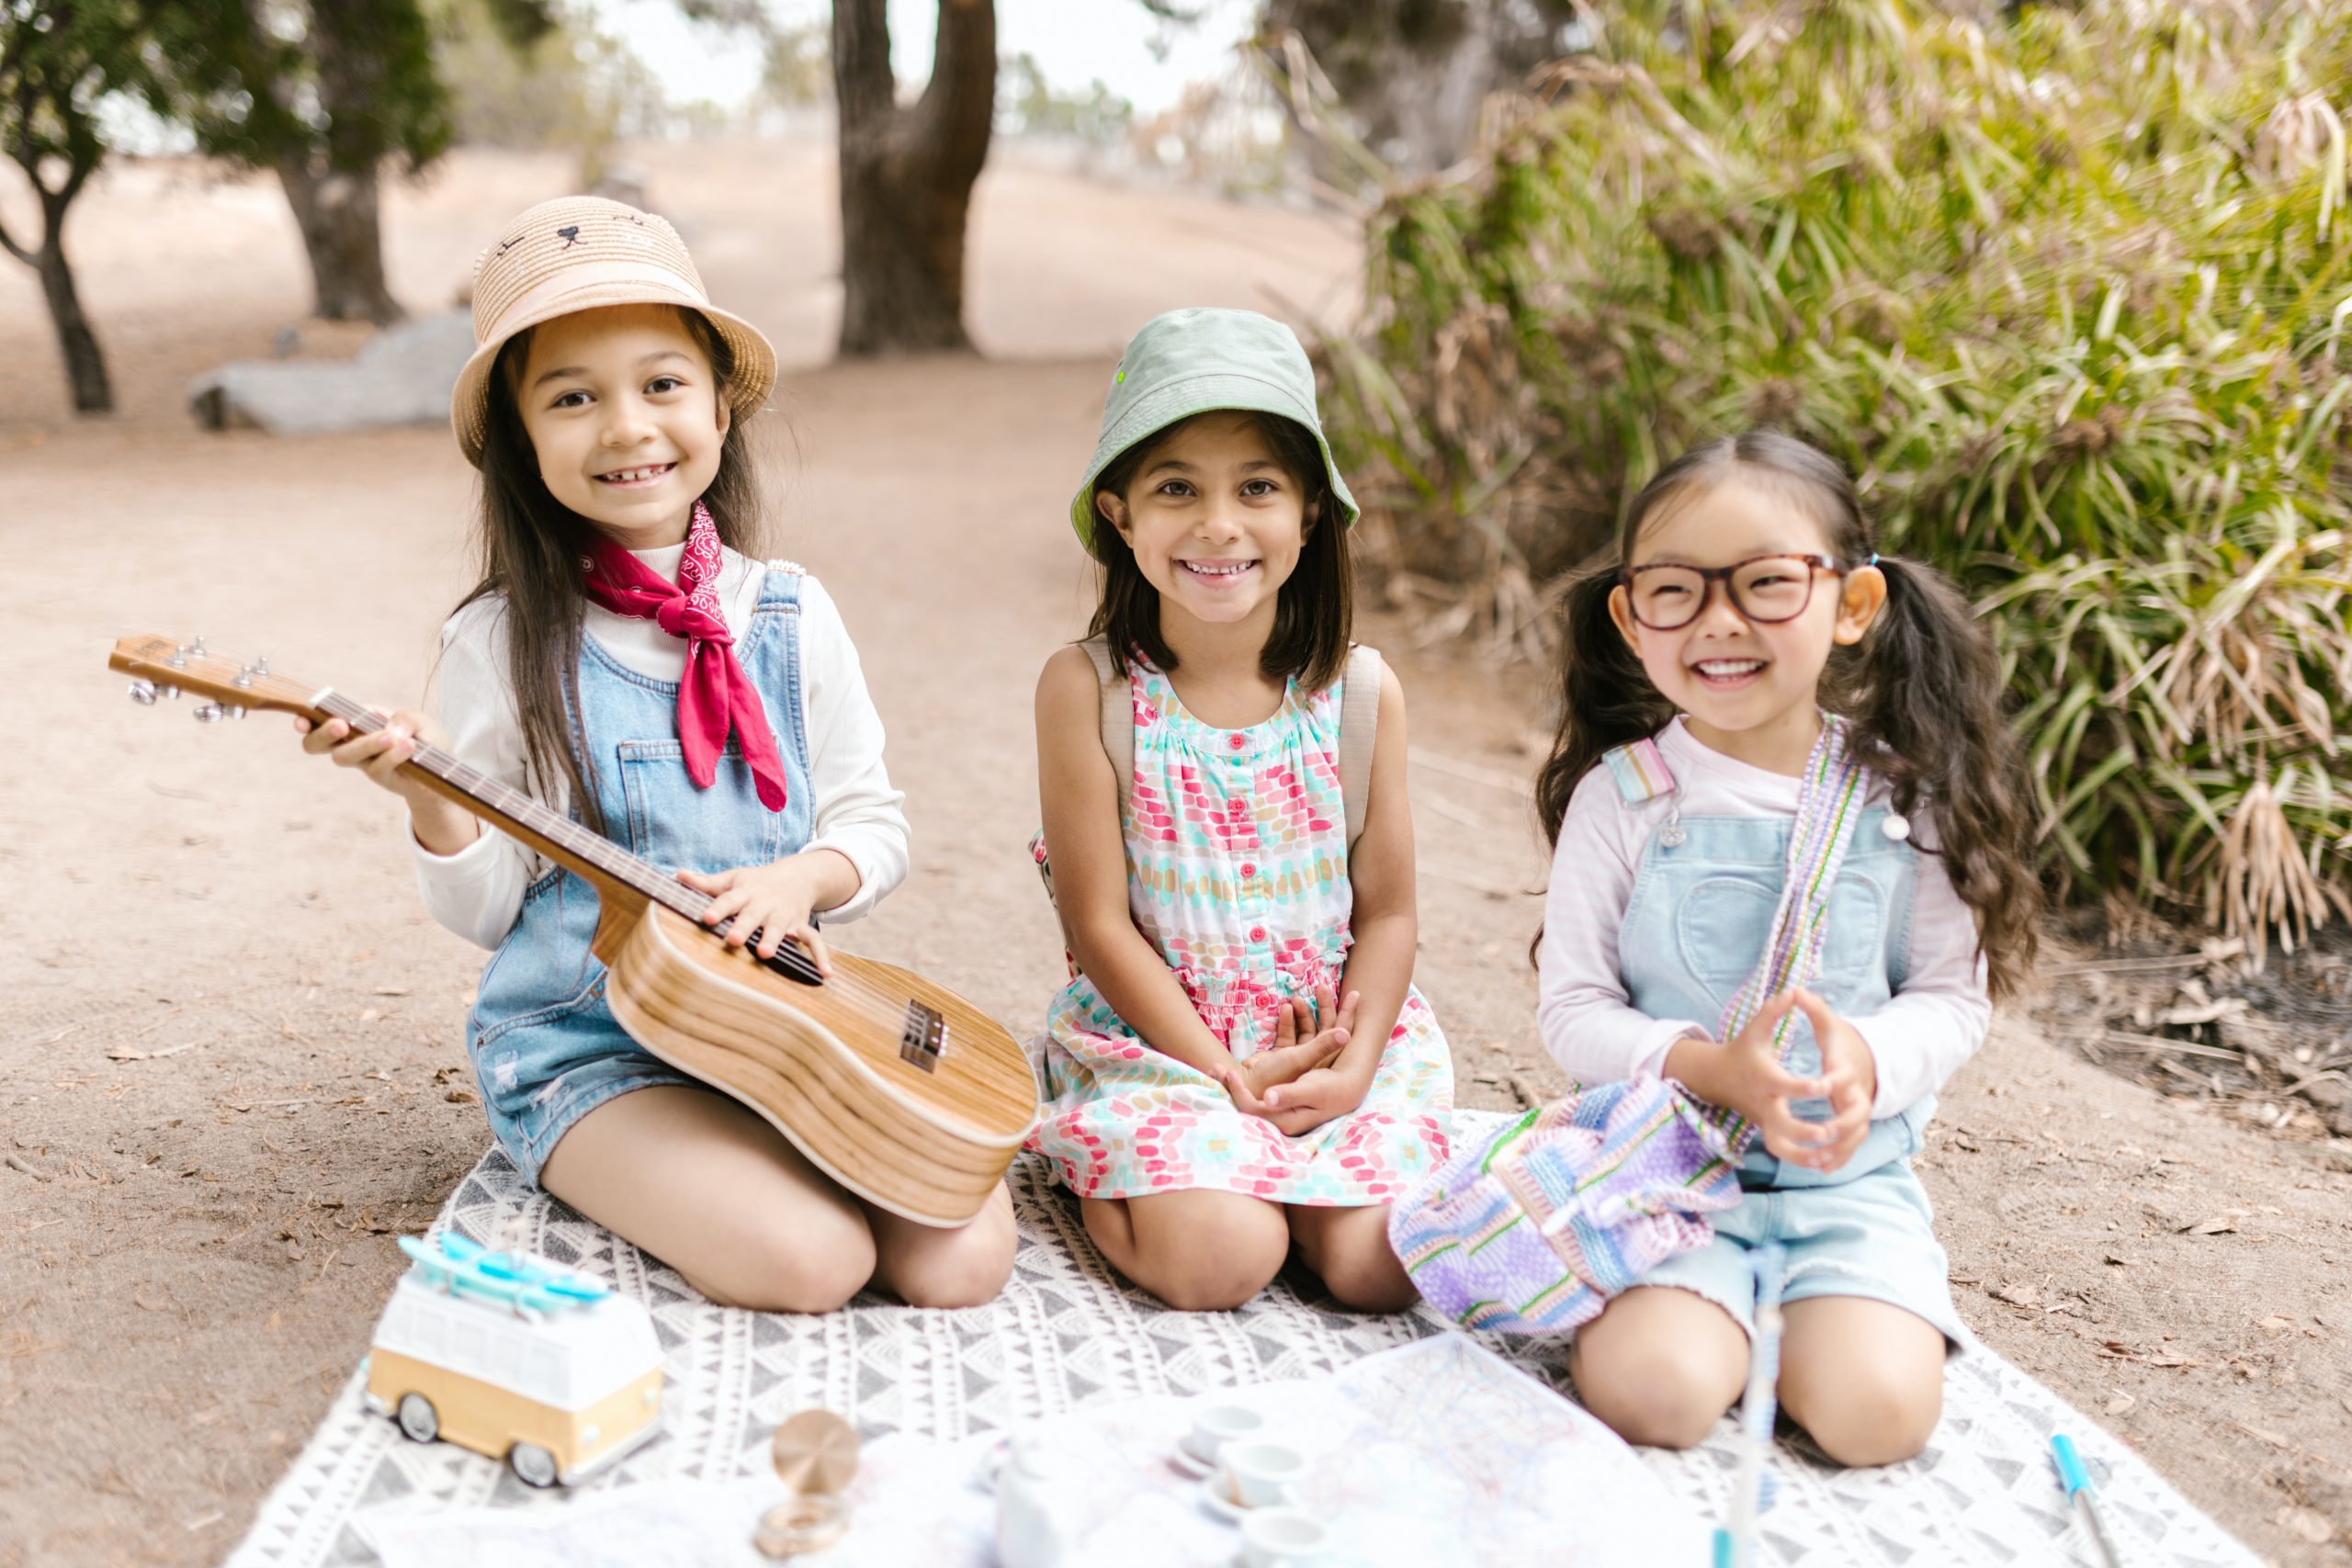 Flower Mound Music Academy offers private lessons in piano, violin, viola, cello and guitar to students of all ages and levels in Flower Mound, Lewisville, Denton, Argyle, Keller area. Both in-person and virtual lessons are available.